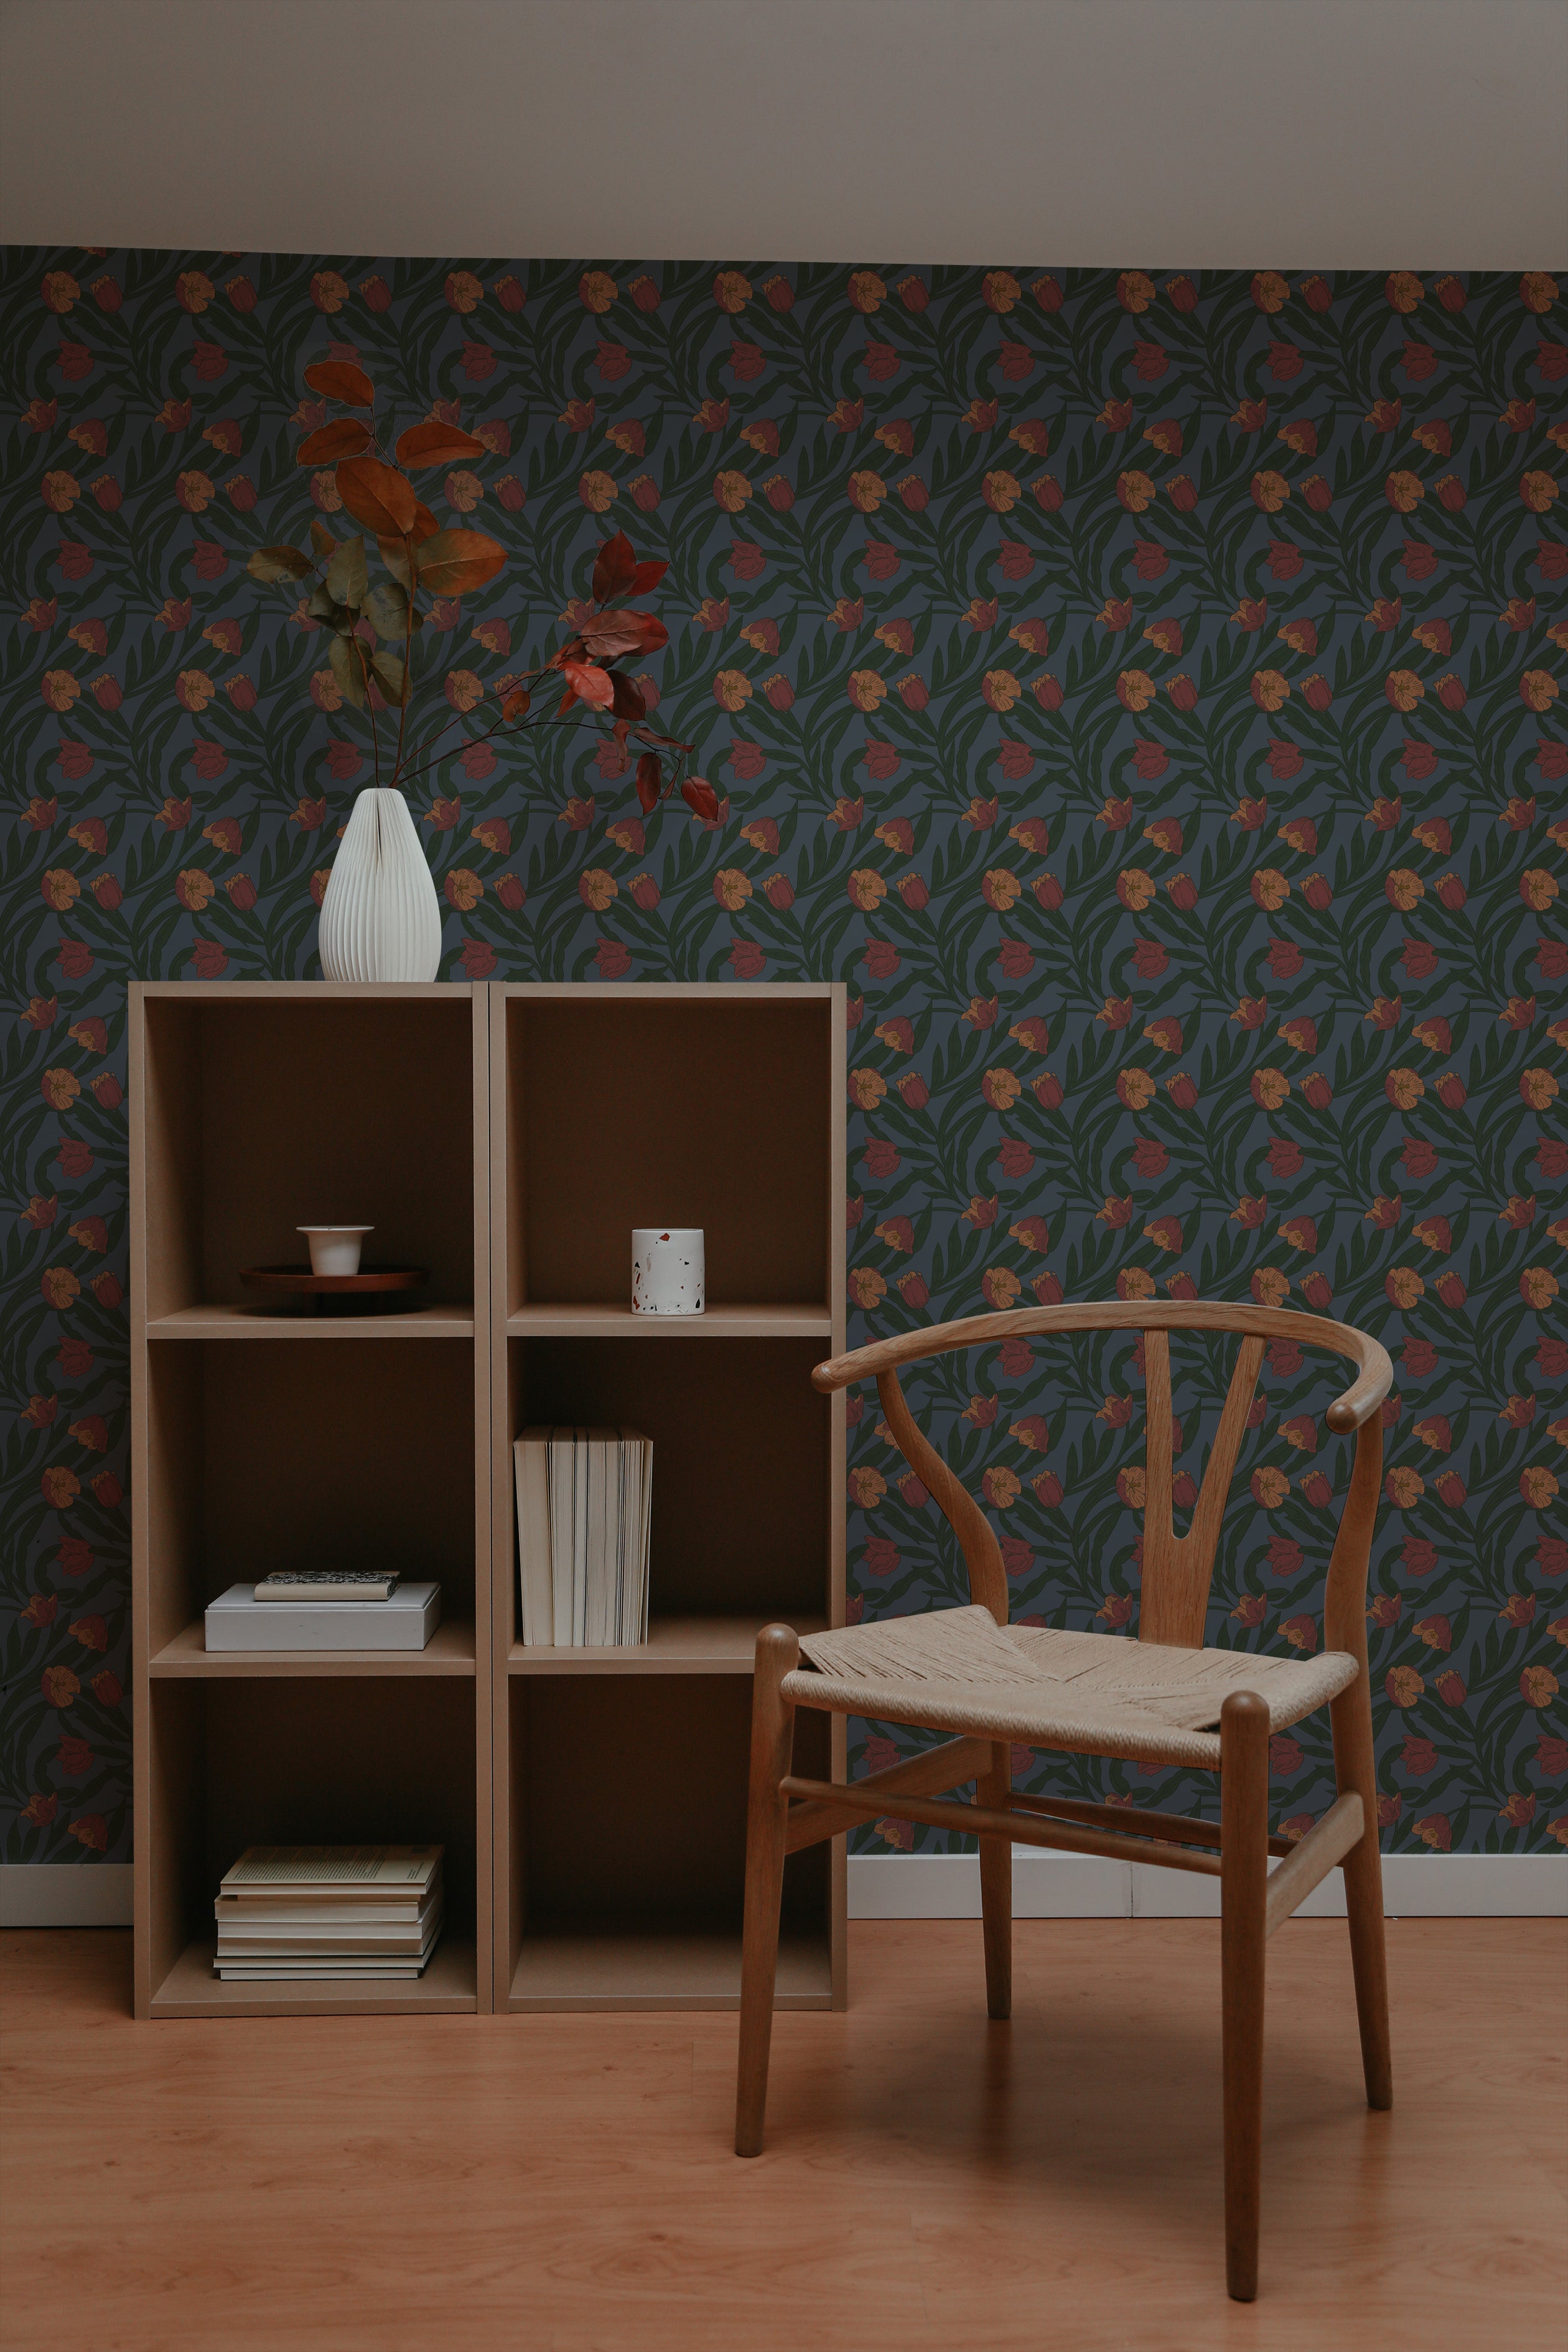 A serene reading nook with a classic wooden chair next to a matching bookshelf filled with books and decorative vases. The wall is covered in Morris Boho Wallpaper, showing a repetitive pattern of orange flowers and green leaves, creating a warm and inviting atmosphere.